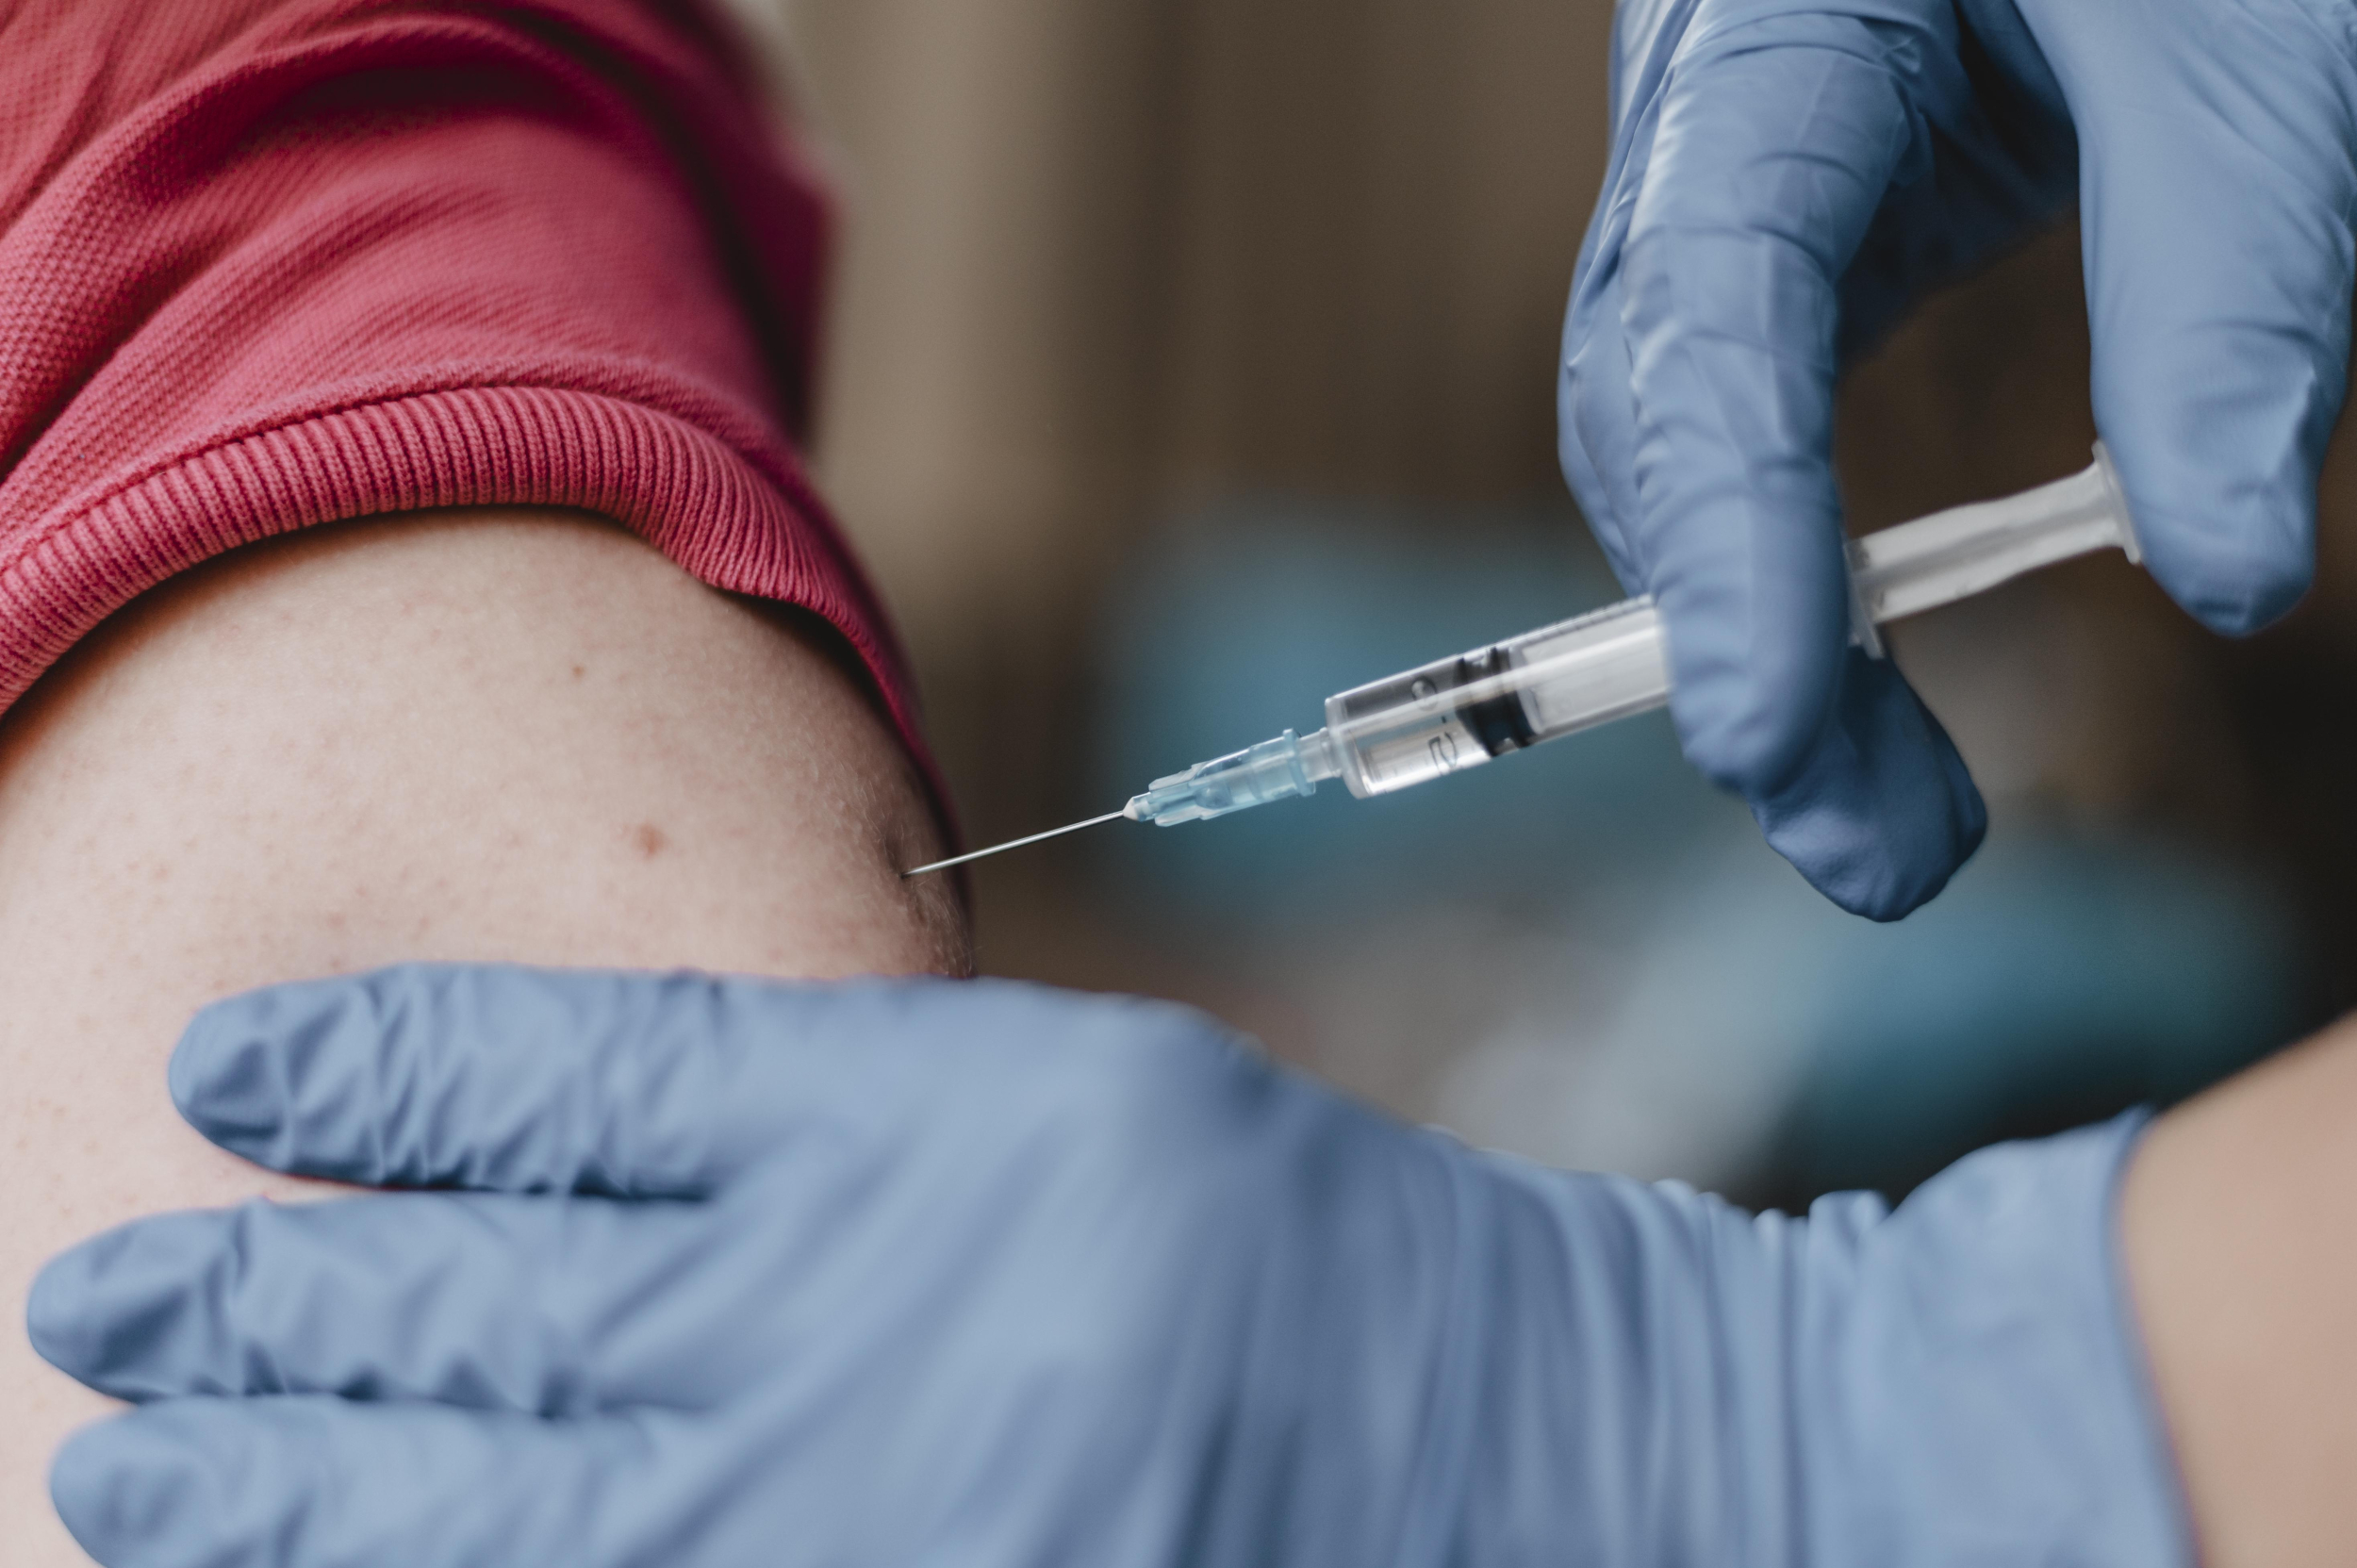 Metabolic Well being At Time Of Vaccination Decides Effectiveness Of Flu Pictures: Research